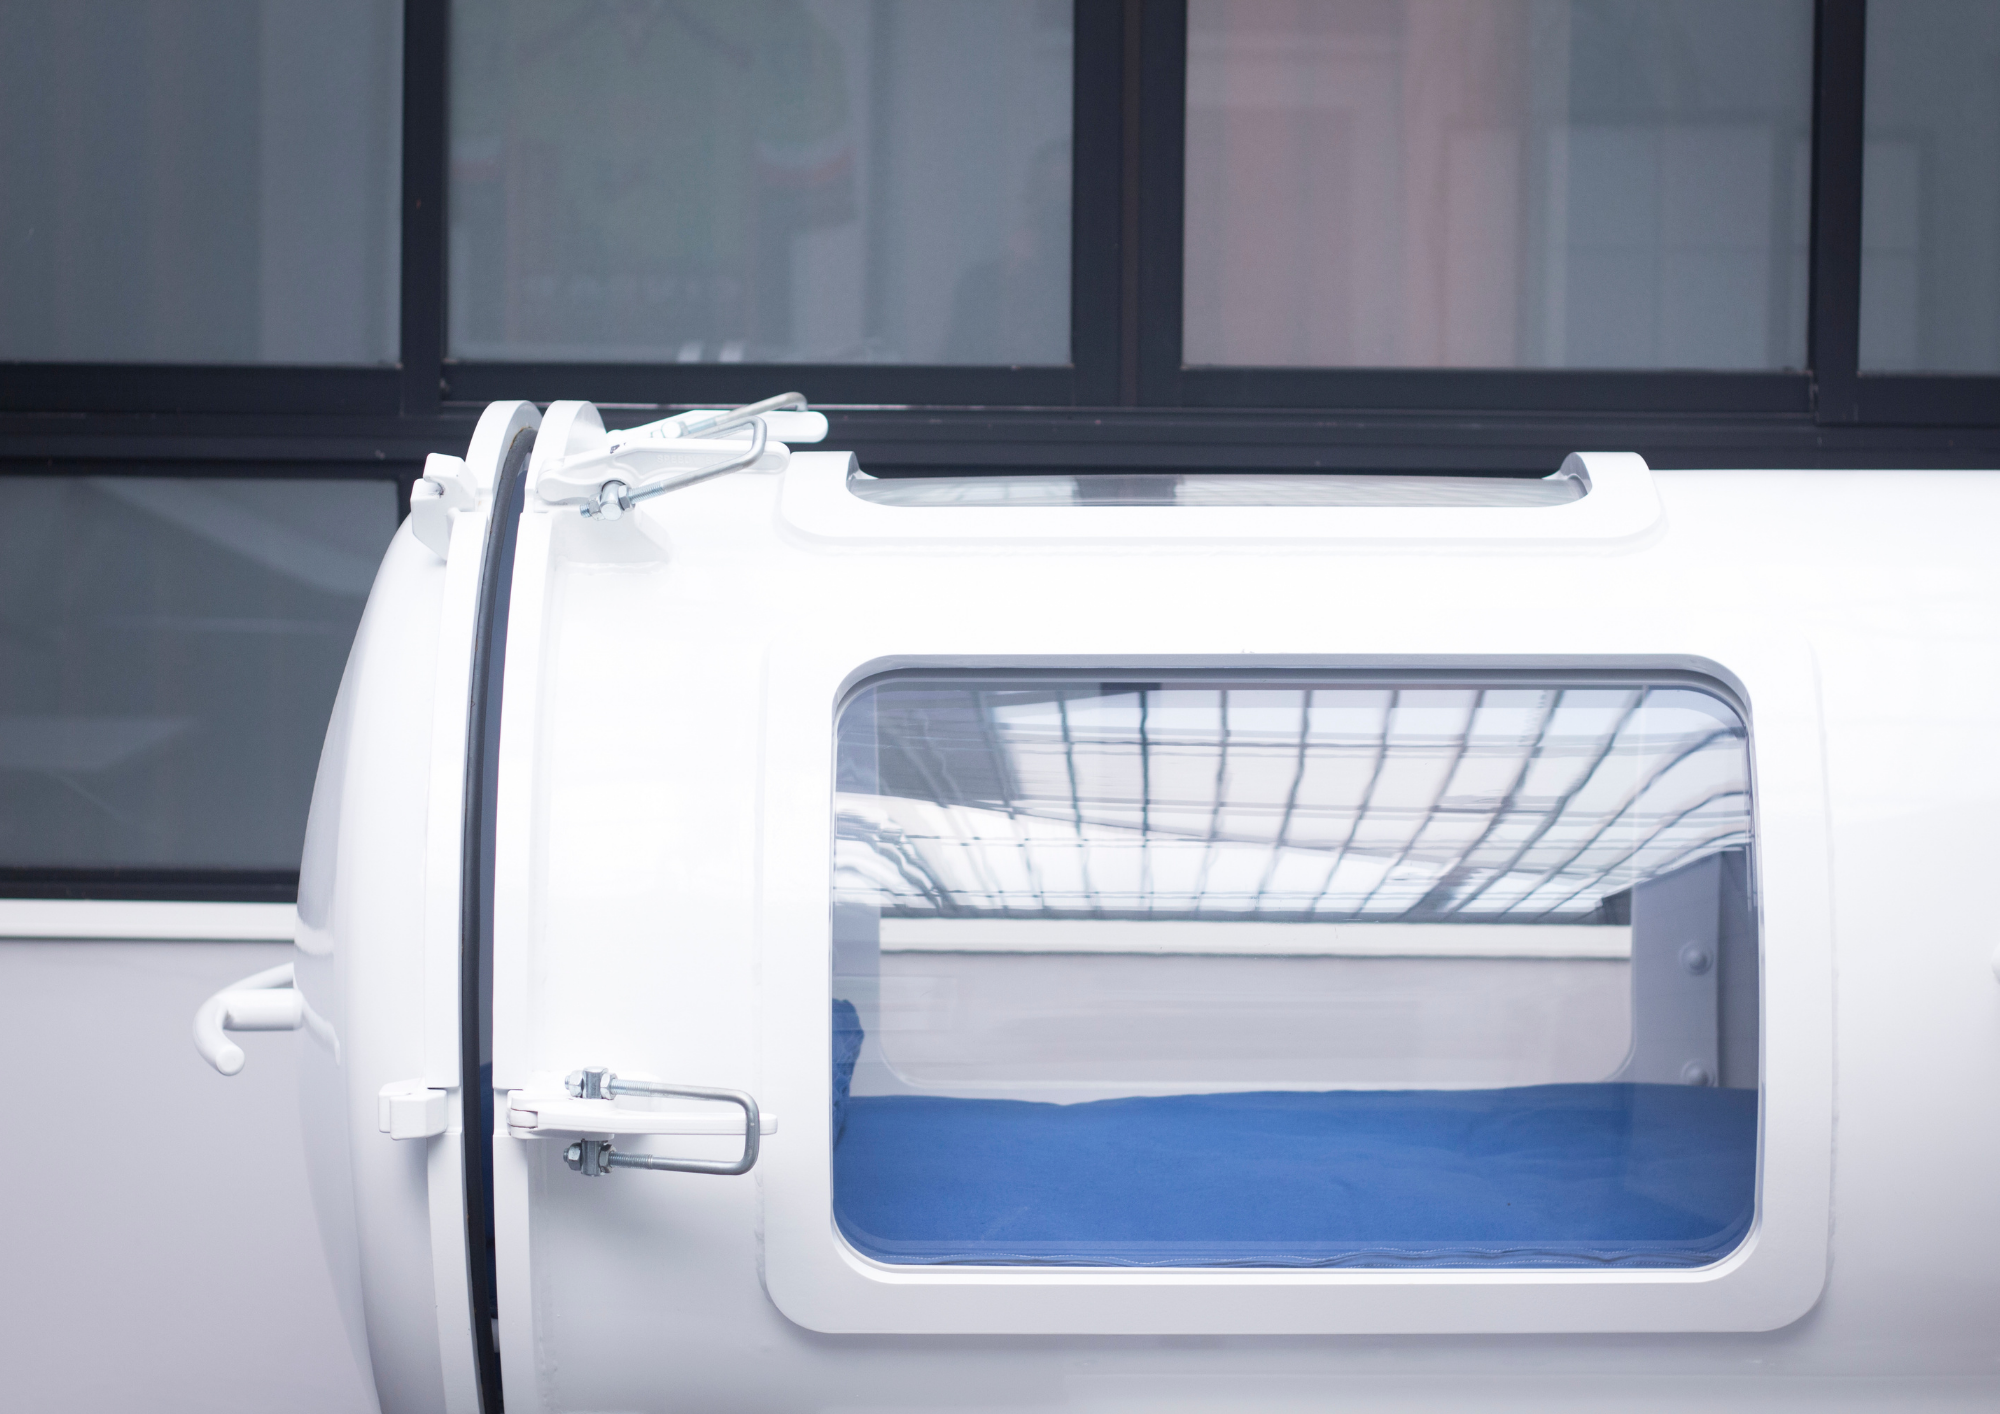 WHAT IS HYPERBARIC OXYGEN THERAPY?